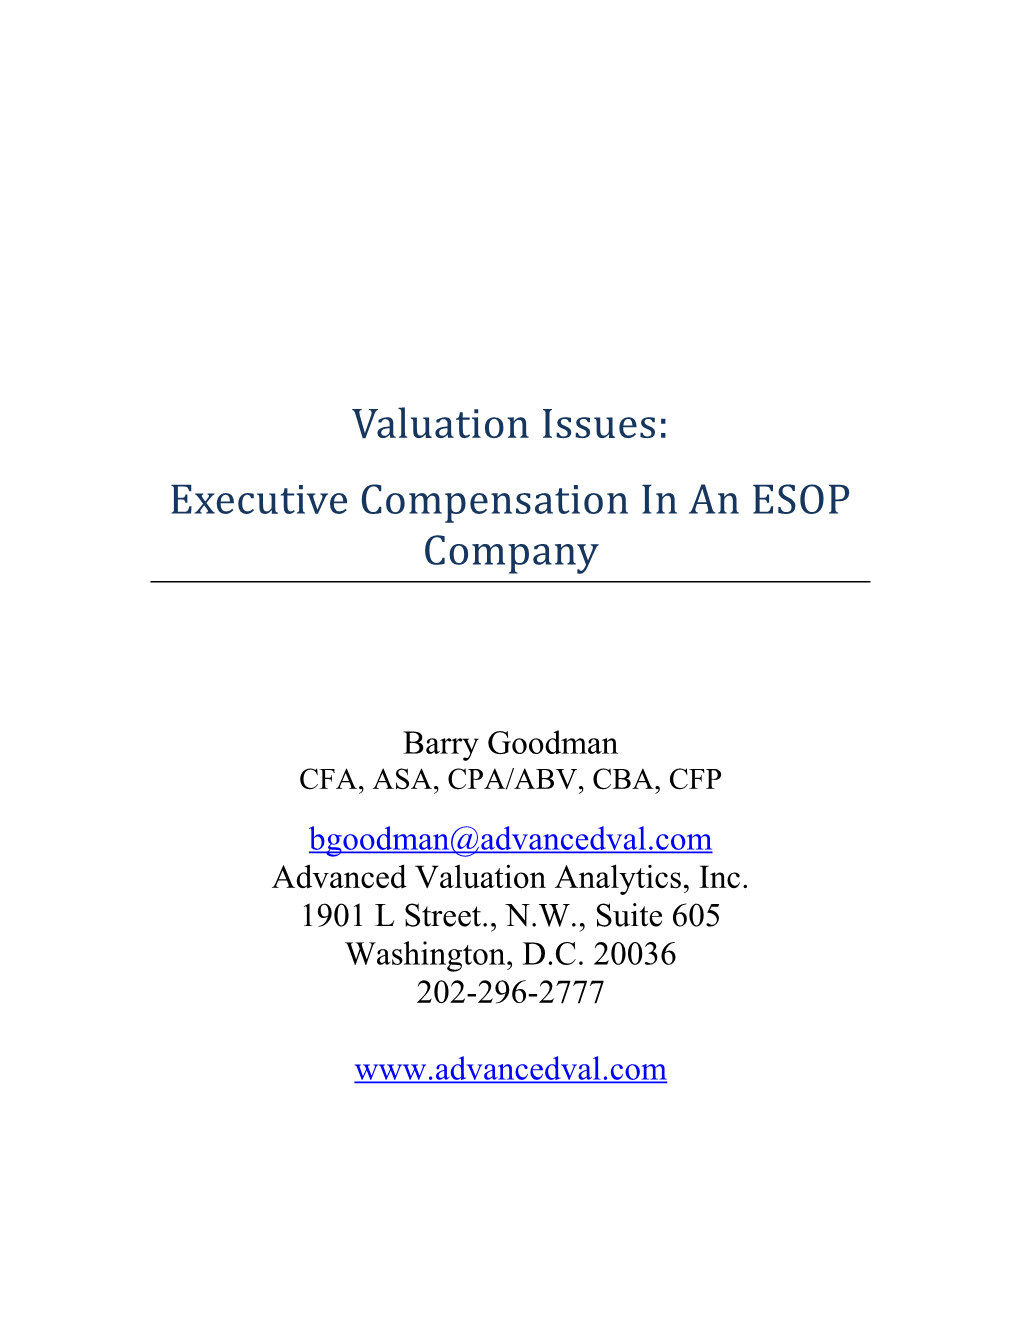 Executive Compensation in an Esop Company